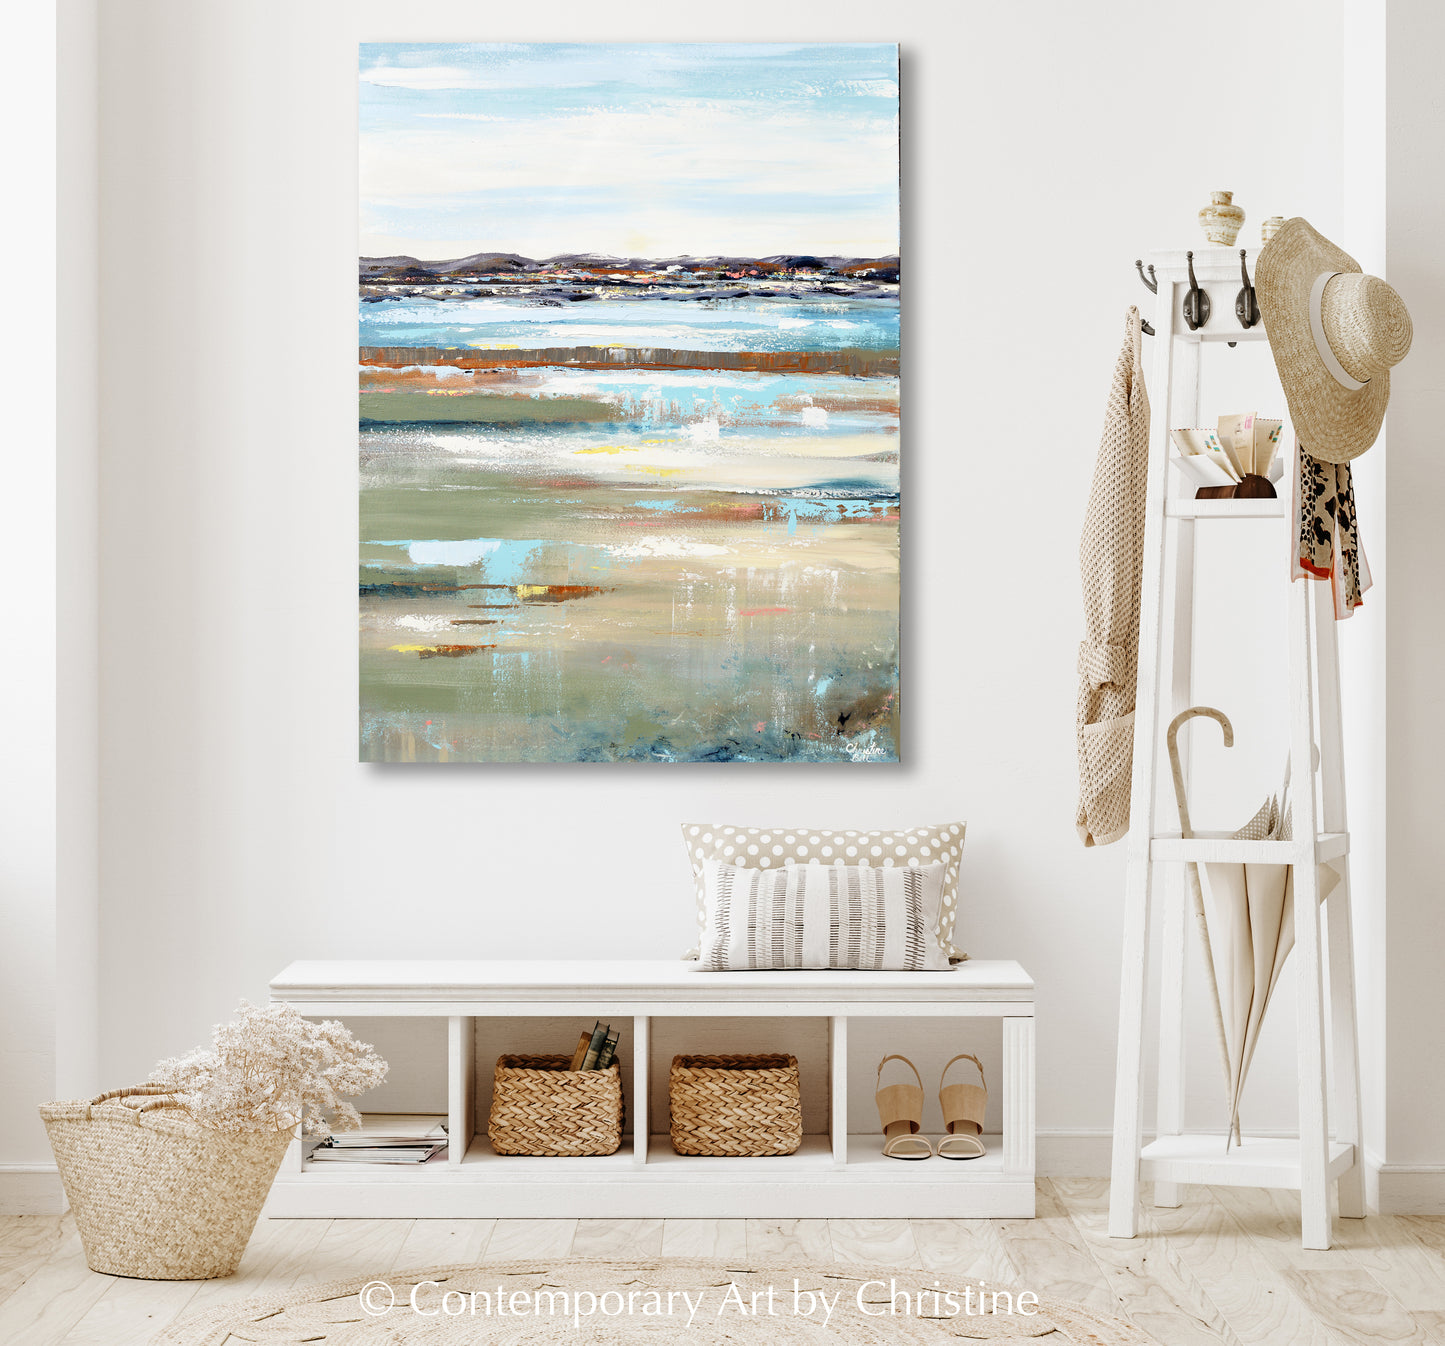 "The Day's Joy" ORIGINAL Art Abstract Painting Beige Olive Green Light Blue Expressionist Landscape Wall Art 30x40"